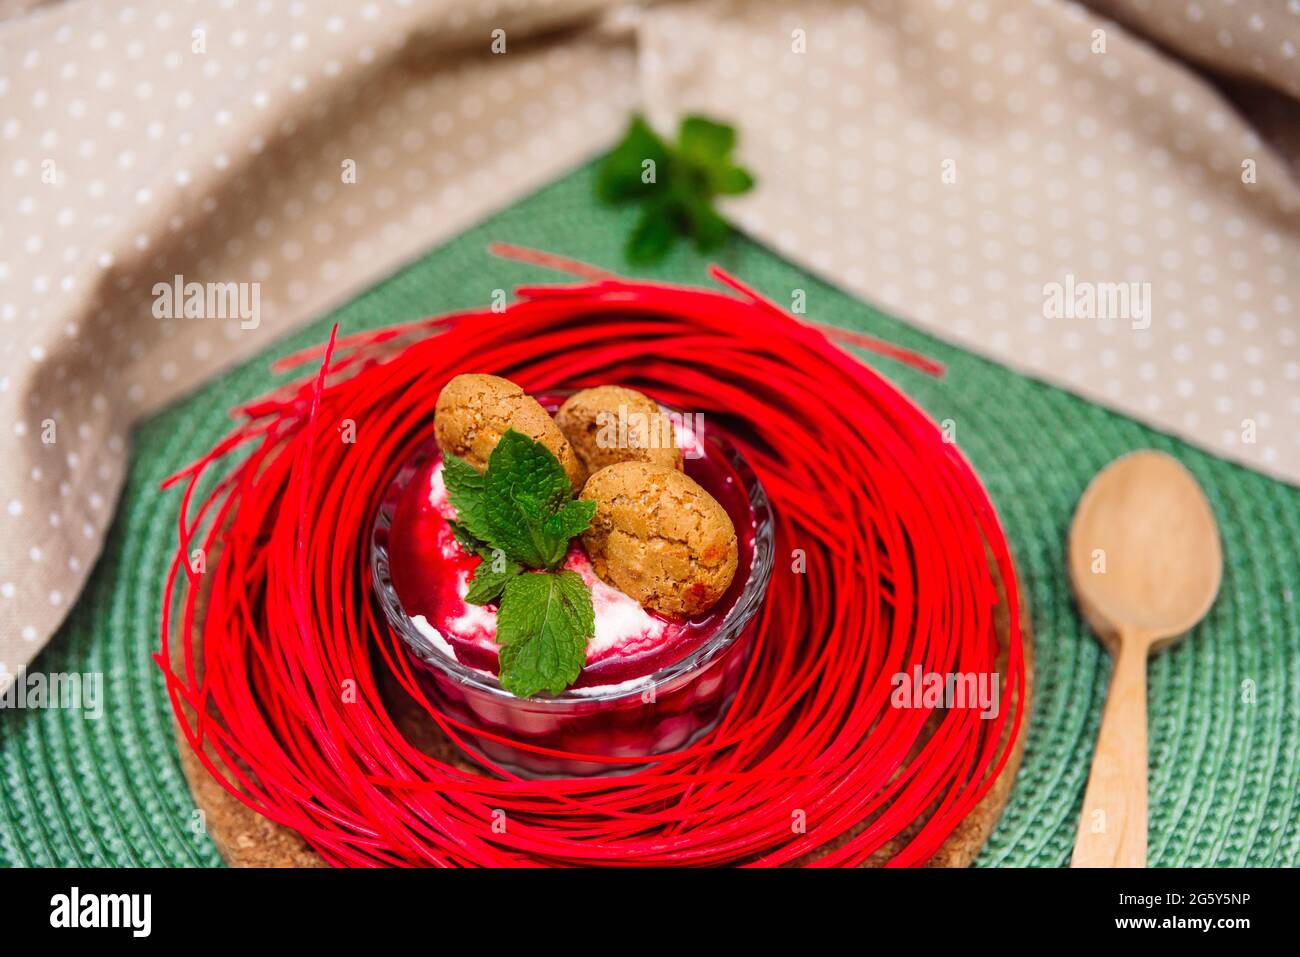 Dessert parfait with strawberry jam in a glass jar decorated with cracked cookies, mint leaves on a wicker green napkin. One small home food portion. Stock Photo